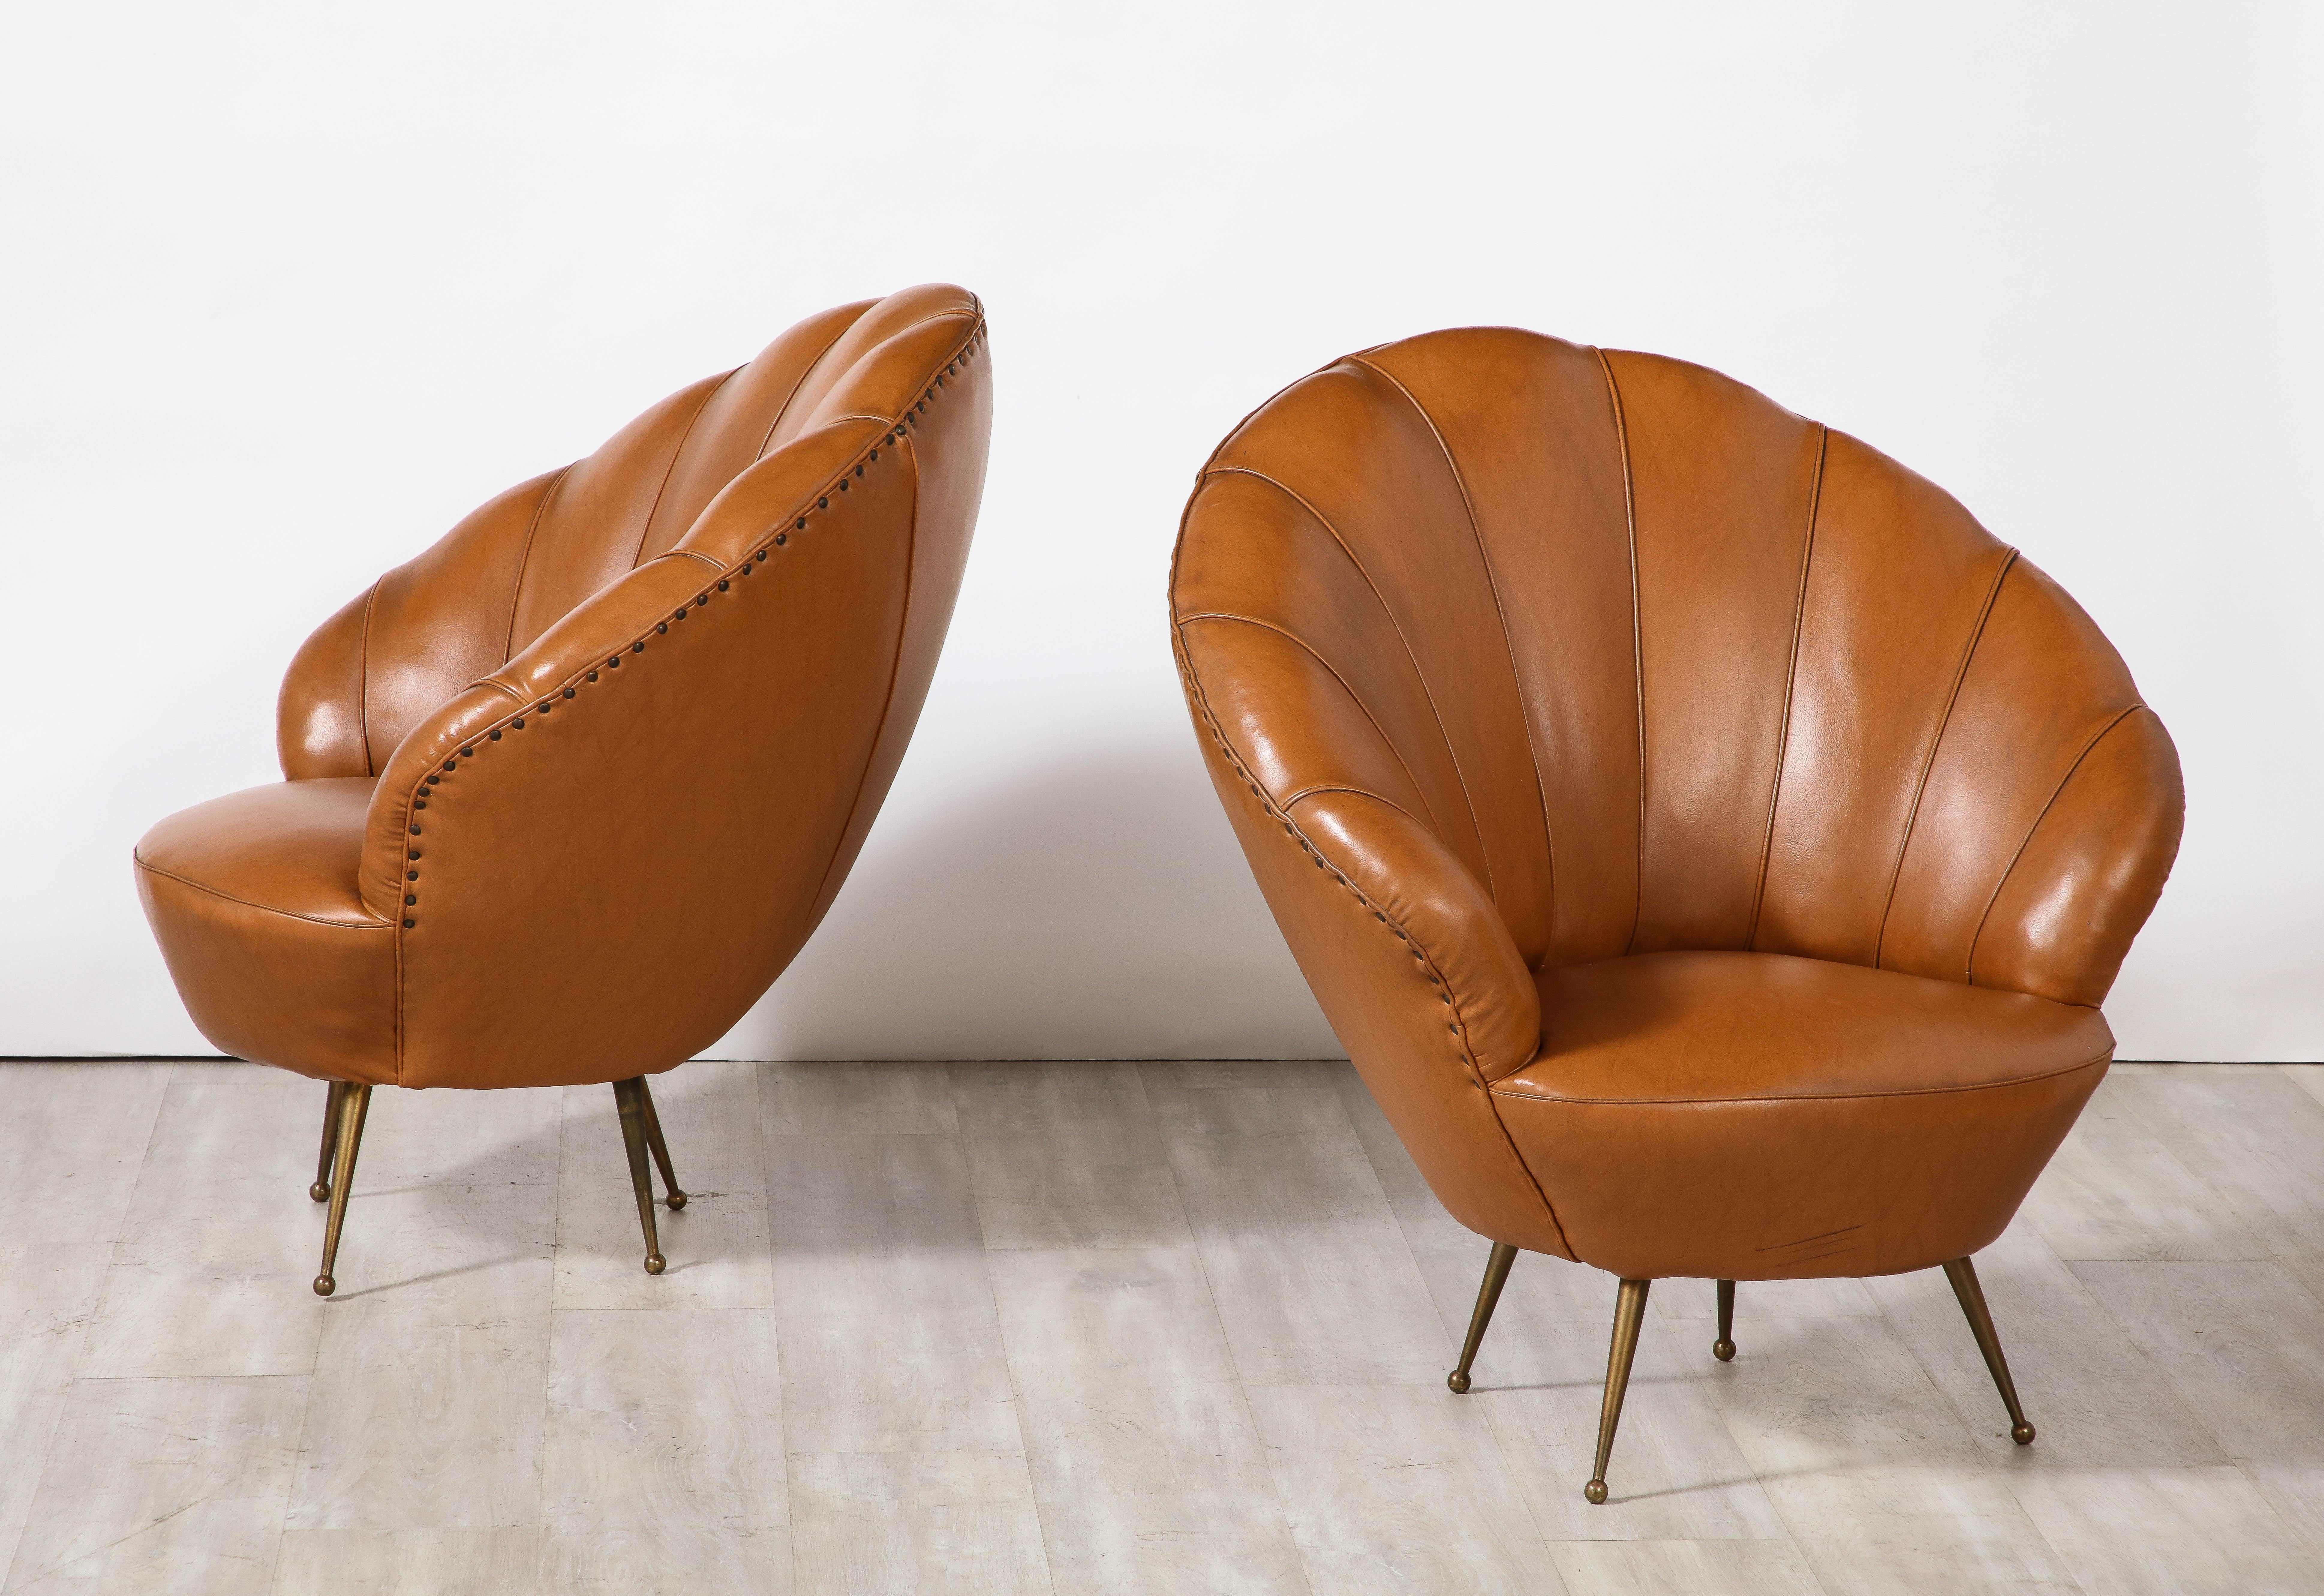 Brass Pair of Italian Modernist Leather Scalloped Lounge Chairs, Circa 1950  For Sale